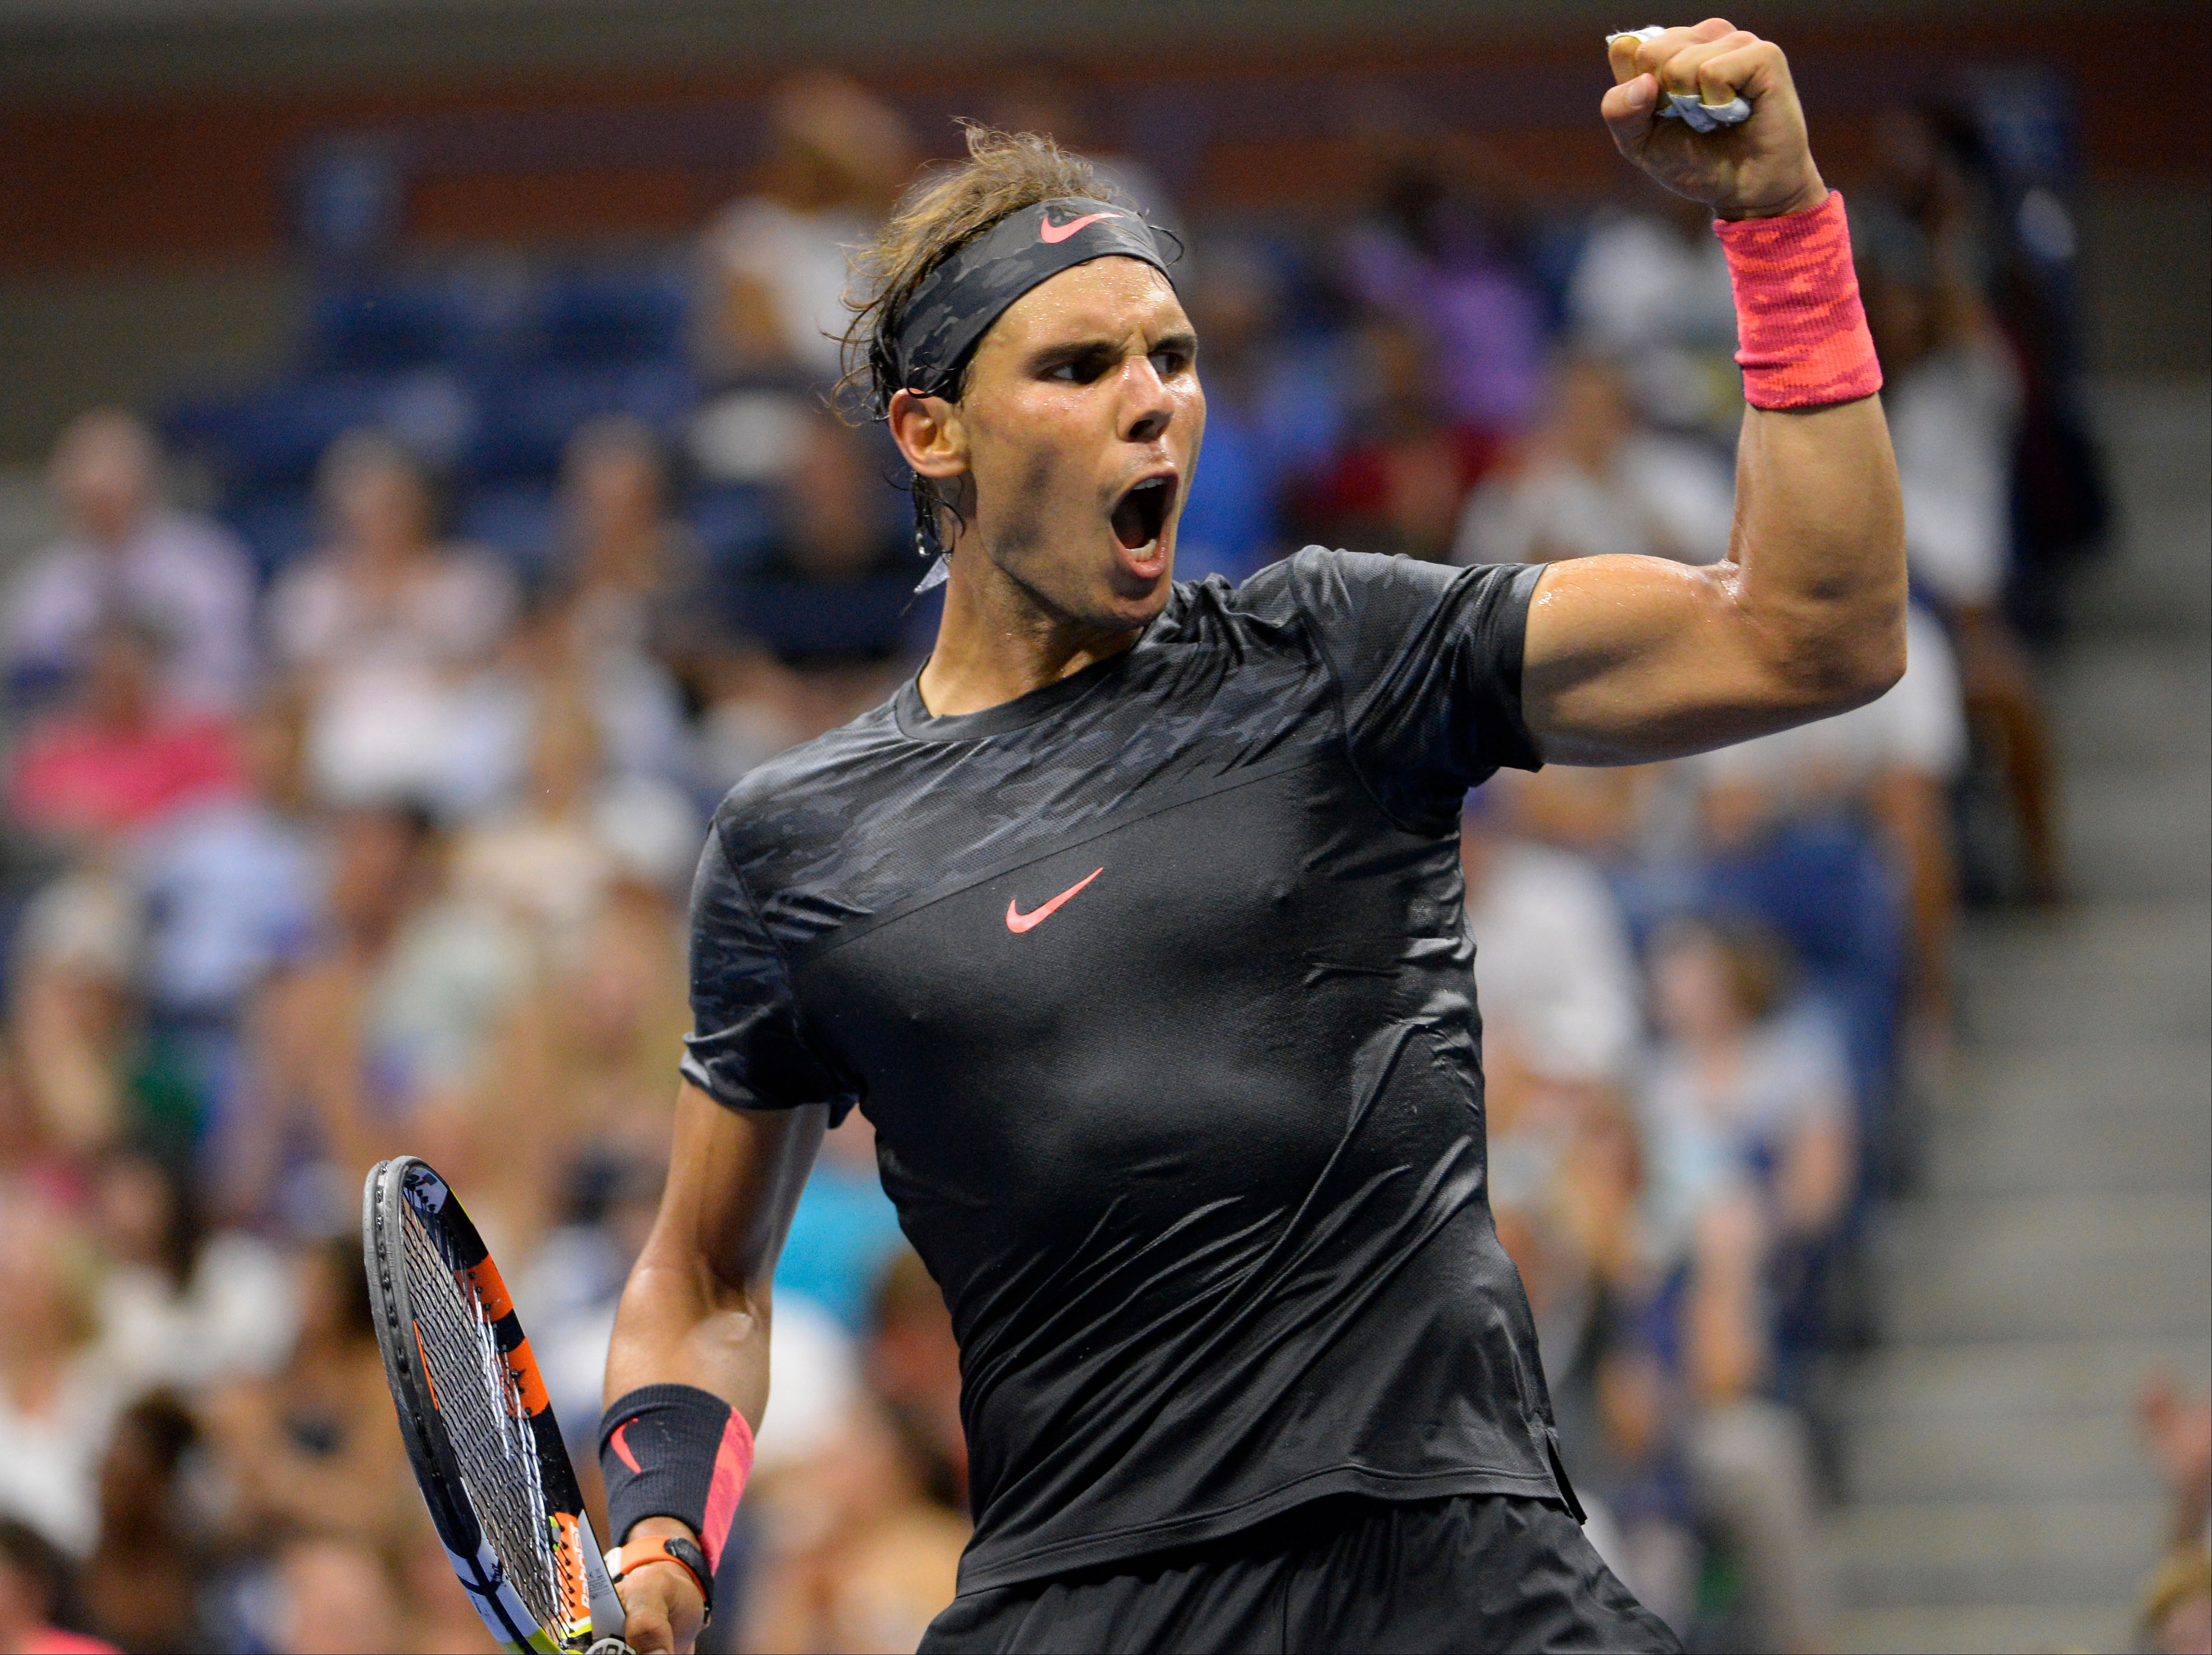 Rafael Nadal of Spain after winning a point to set up match point against  Borna Coric of Croatia on day one of the 2015 US Open tennis tournament at USTA Billie Jean King National Tennis Center. Photo: USA TODAY Sports via Reuters 